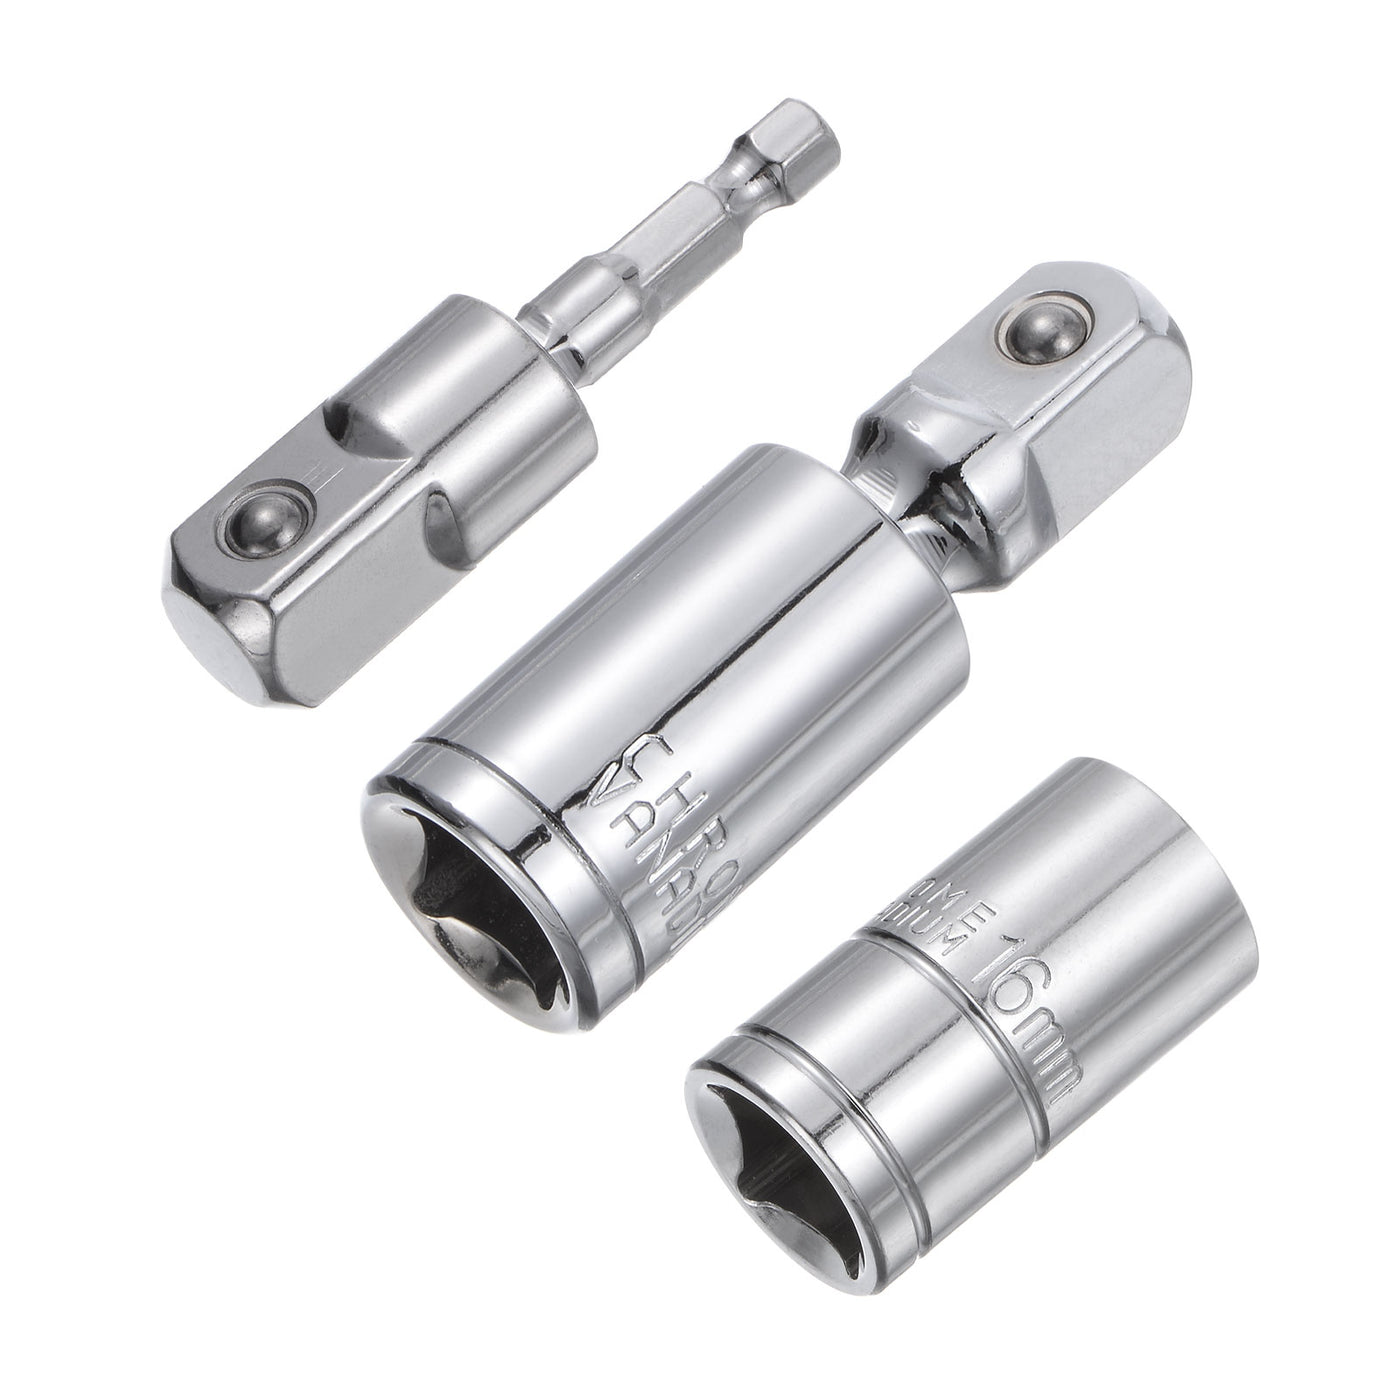 uxcell Uxcell 1/2" Drive 16mm Shallow Socket Swivel Joints Hex Shank Impact Driver Adaptor Set